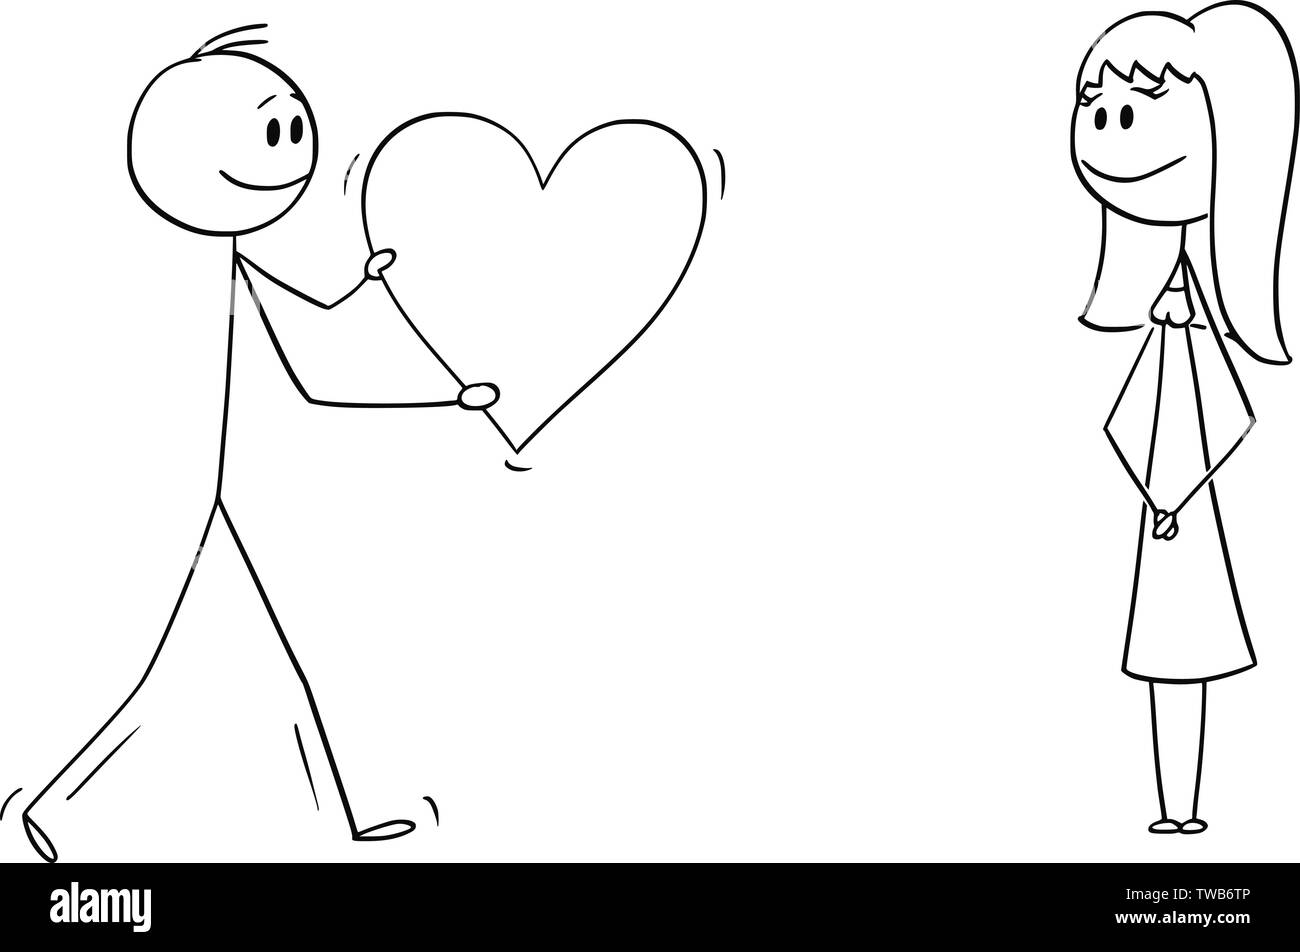 Vector Cartoon Stick Figure Drawing Conceptual Illustration Of Man Or Boy Giving Bog Romantic Heart To Girl Or Woman On Date Declaration Or Confession Of Love Stock Vector Image Art